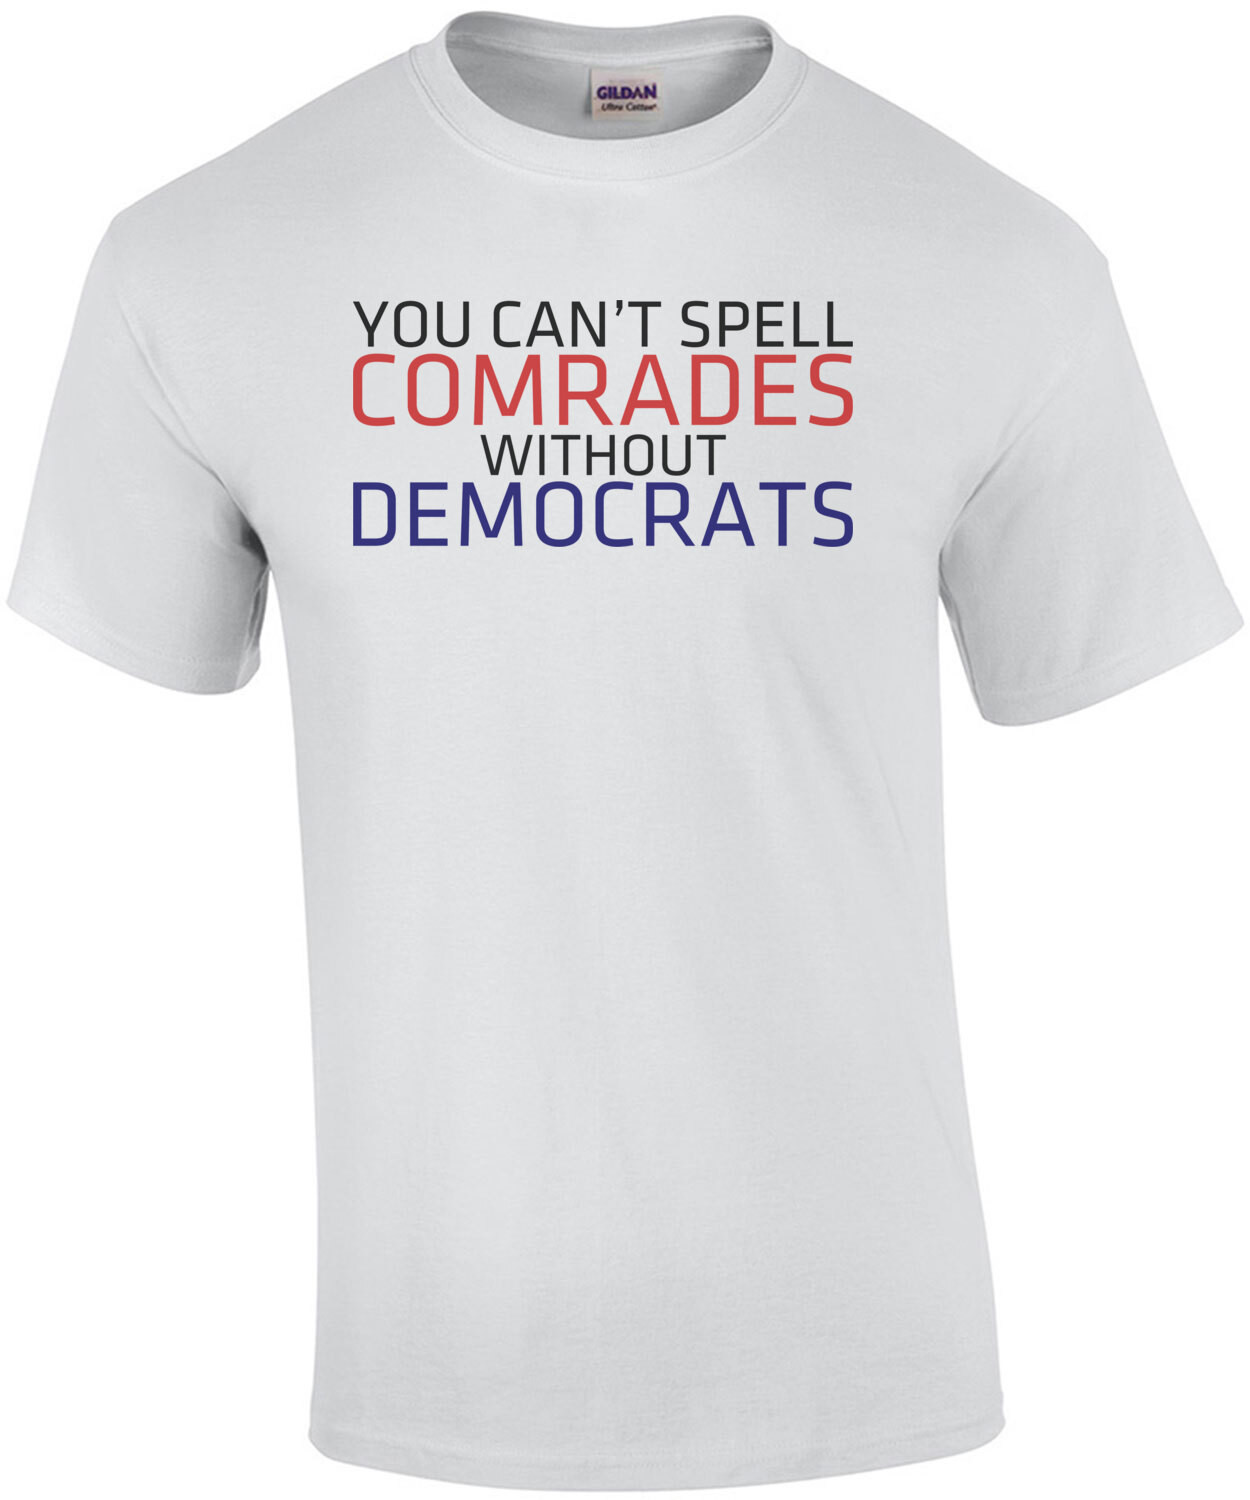 You Can't Spell Comrades Without Democrats